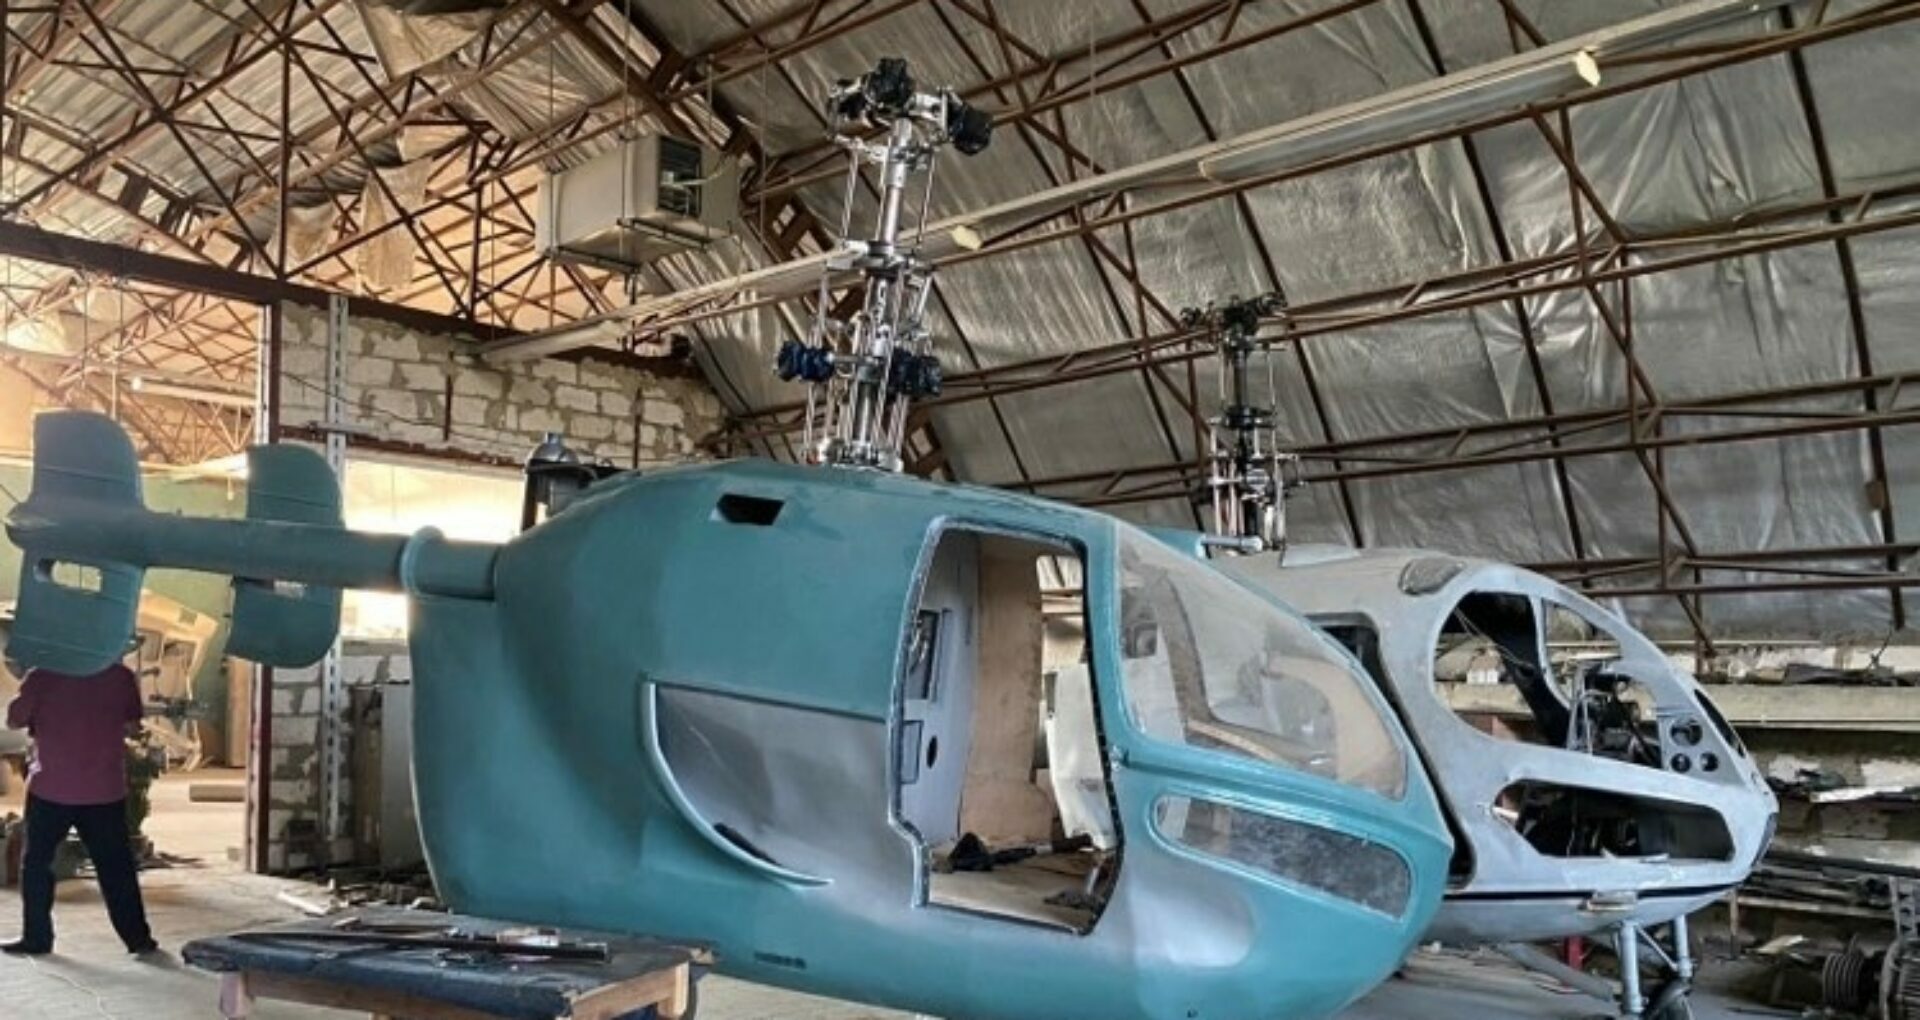 The Authorities Closed an Illegal Factory that Produced Helicopters